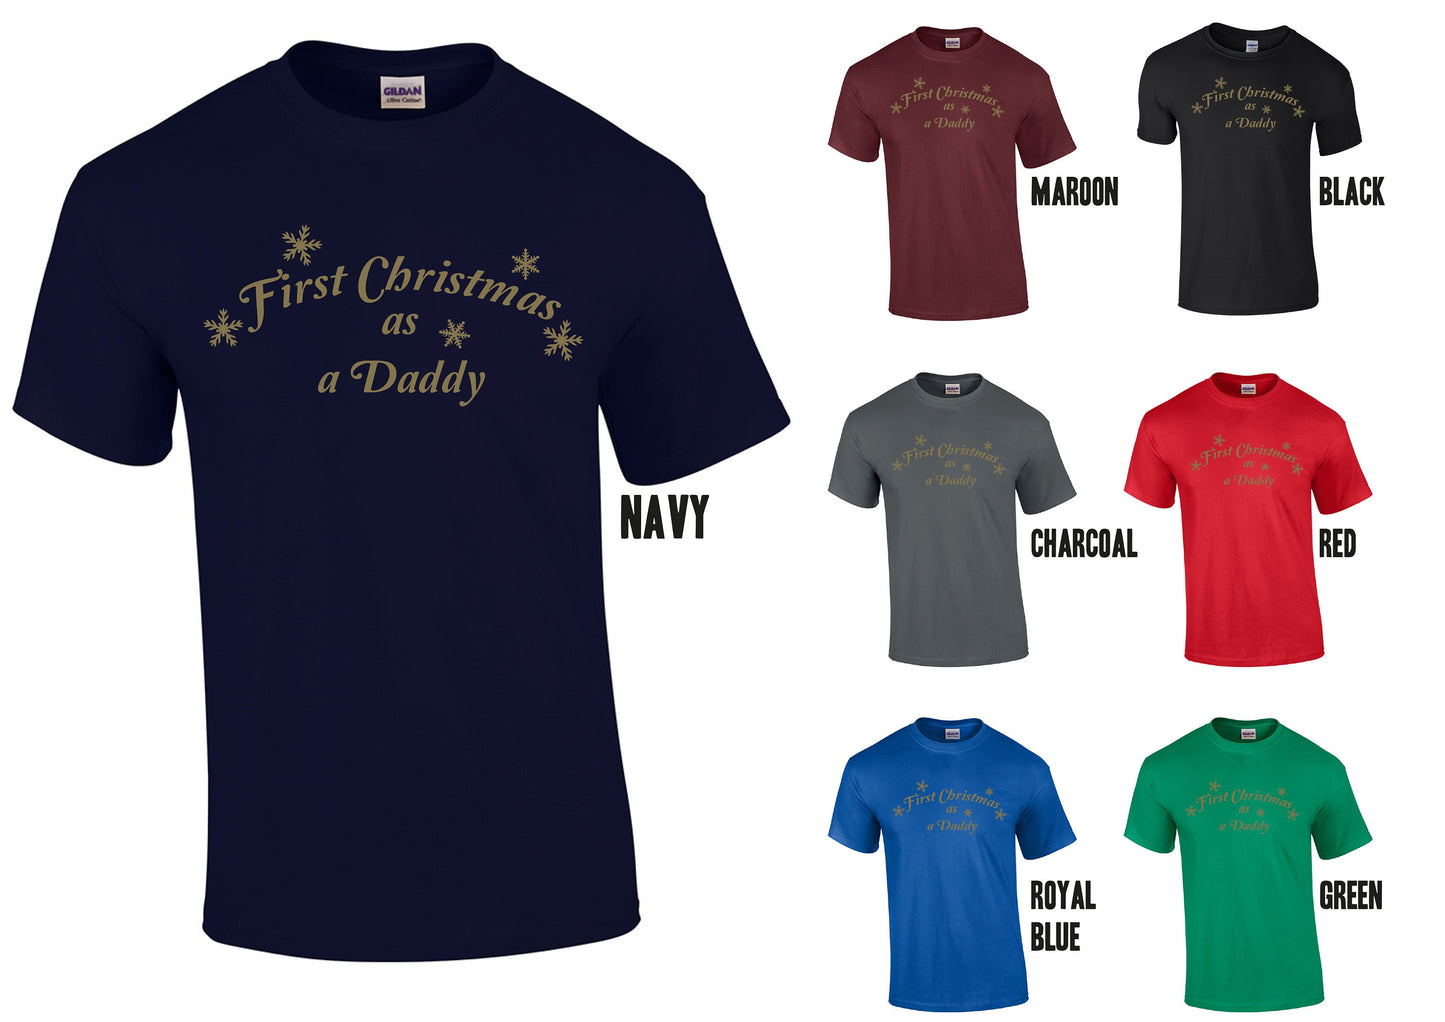 First Christmas as a Daddy T-Shirt - Gold Print - Can be changed to Dad or Pop or any other variation